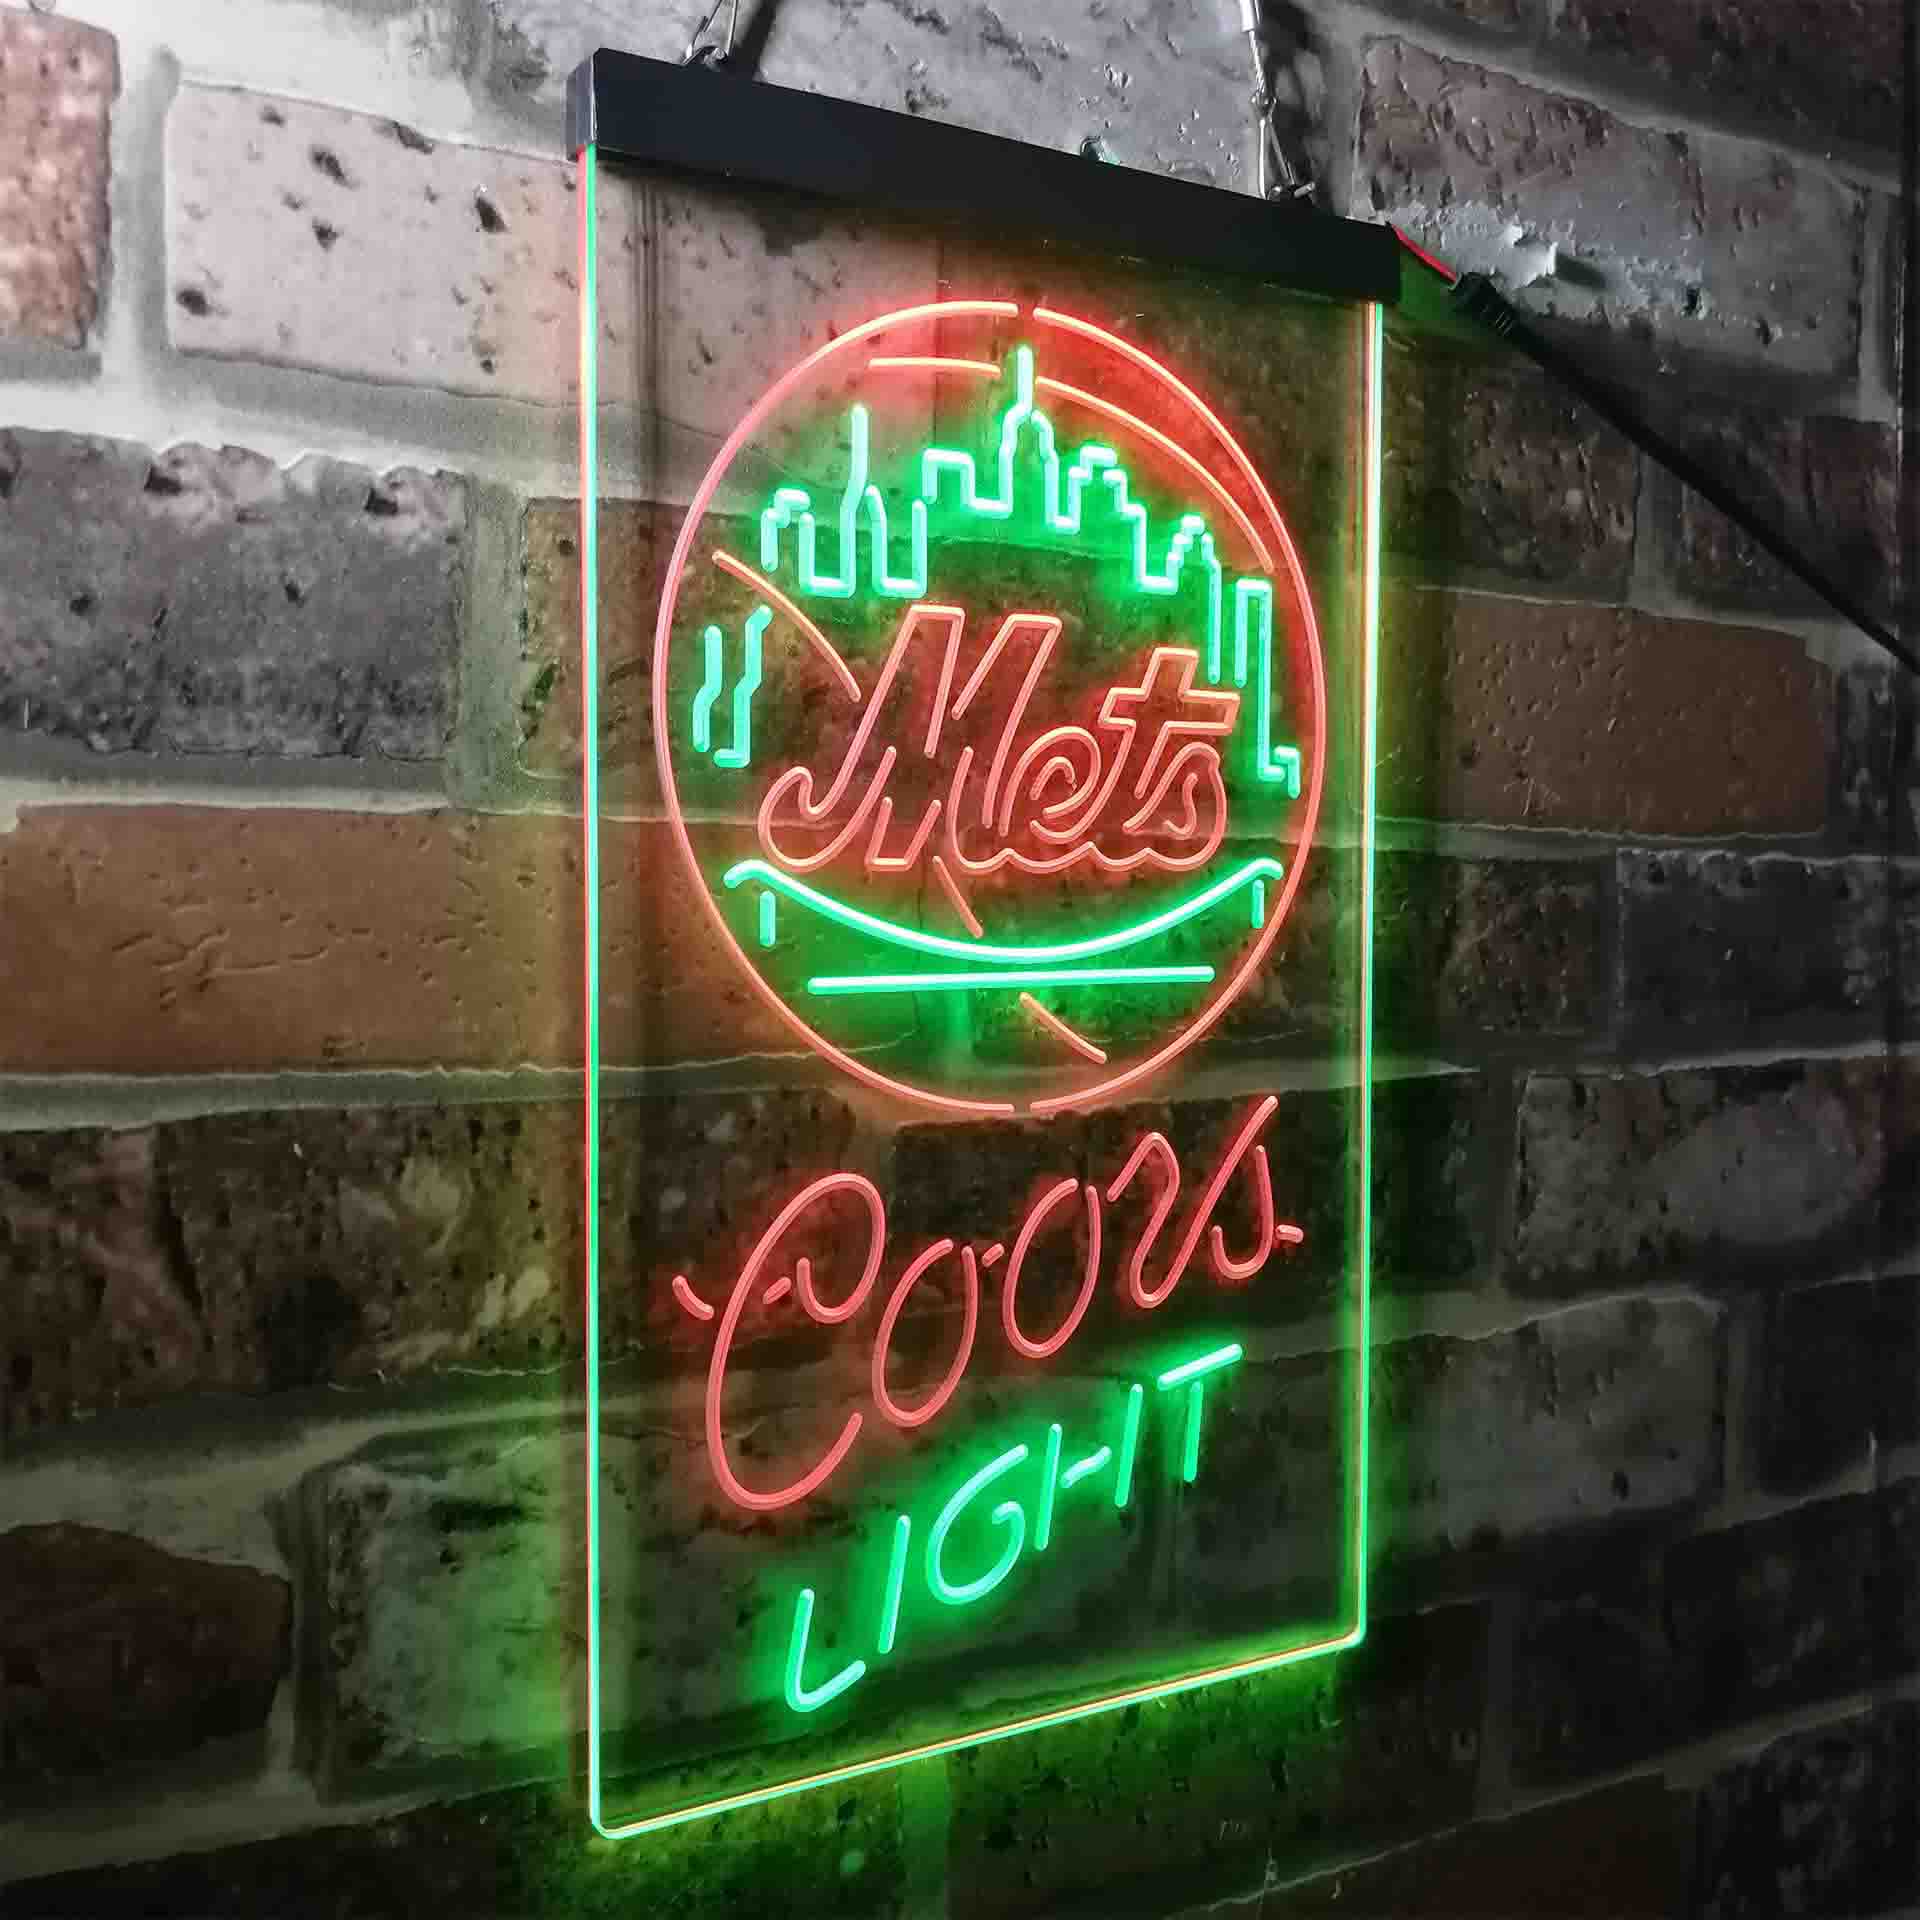 Coors Light Beer Baseball NYM LED Neon Sign